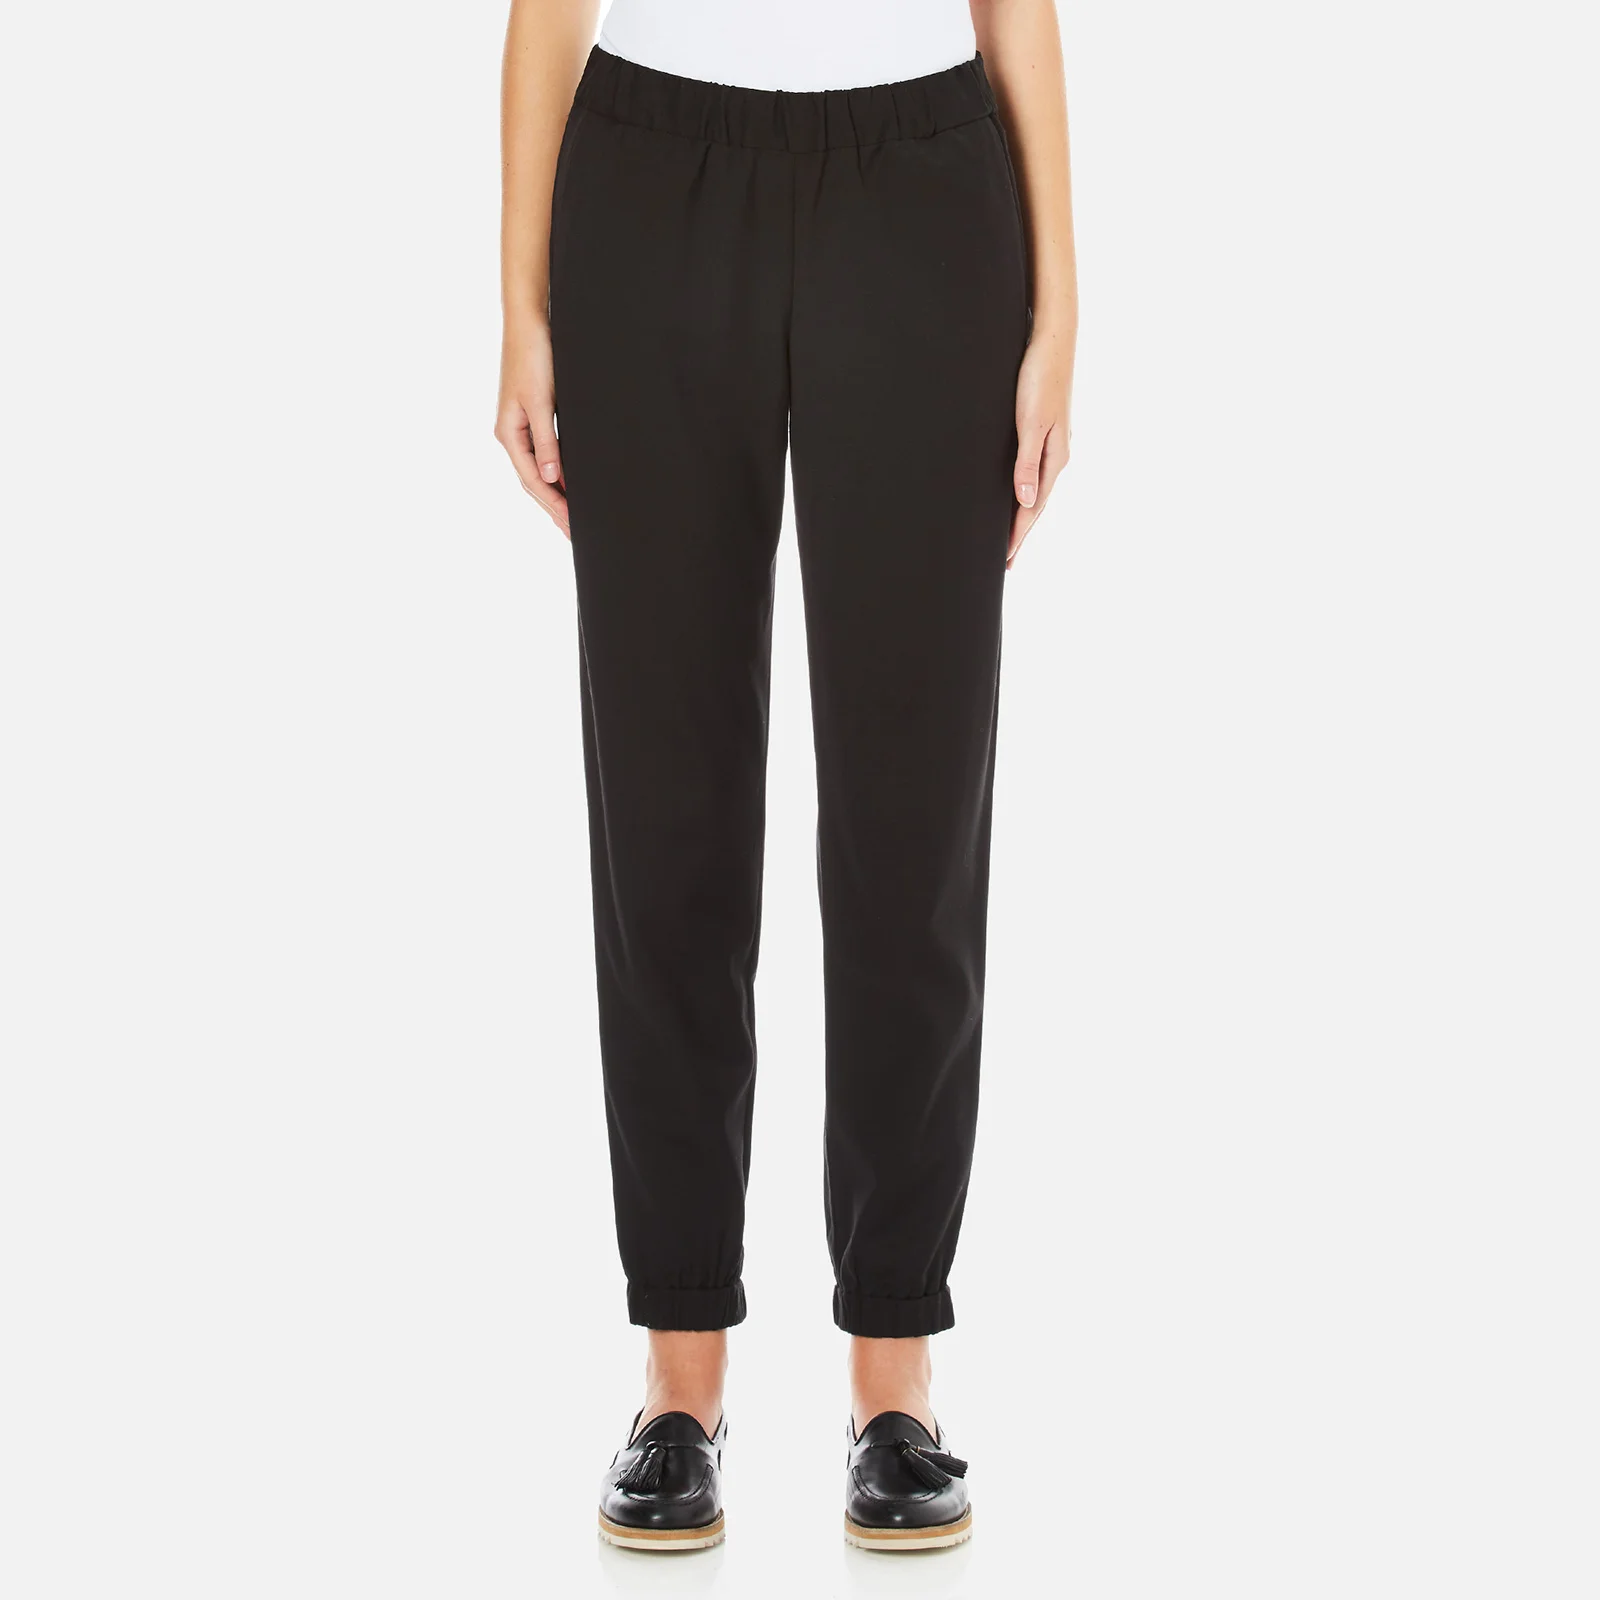 French Connection Women's Dolly Drape Joggers - Black Image 1